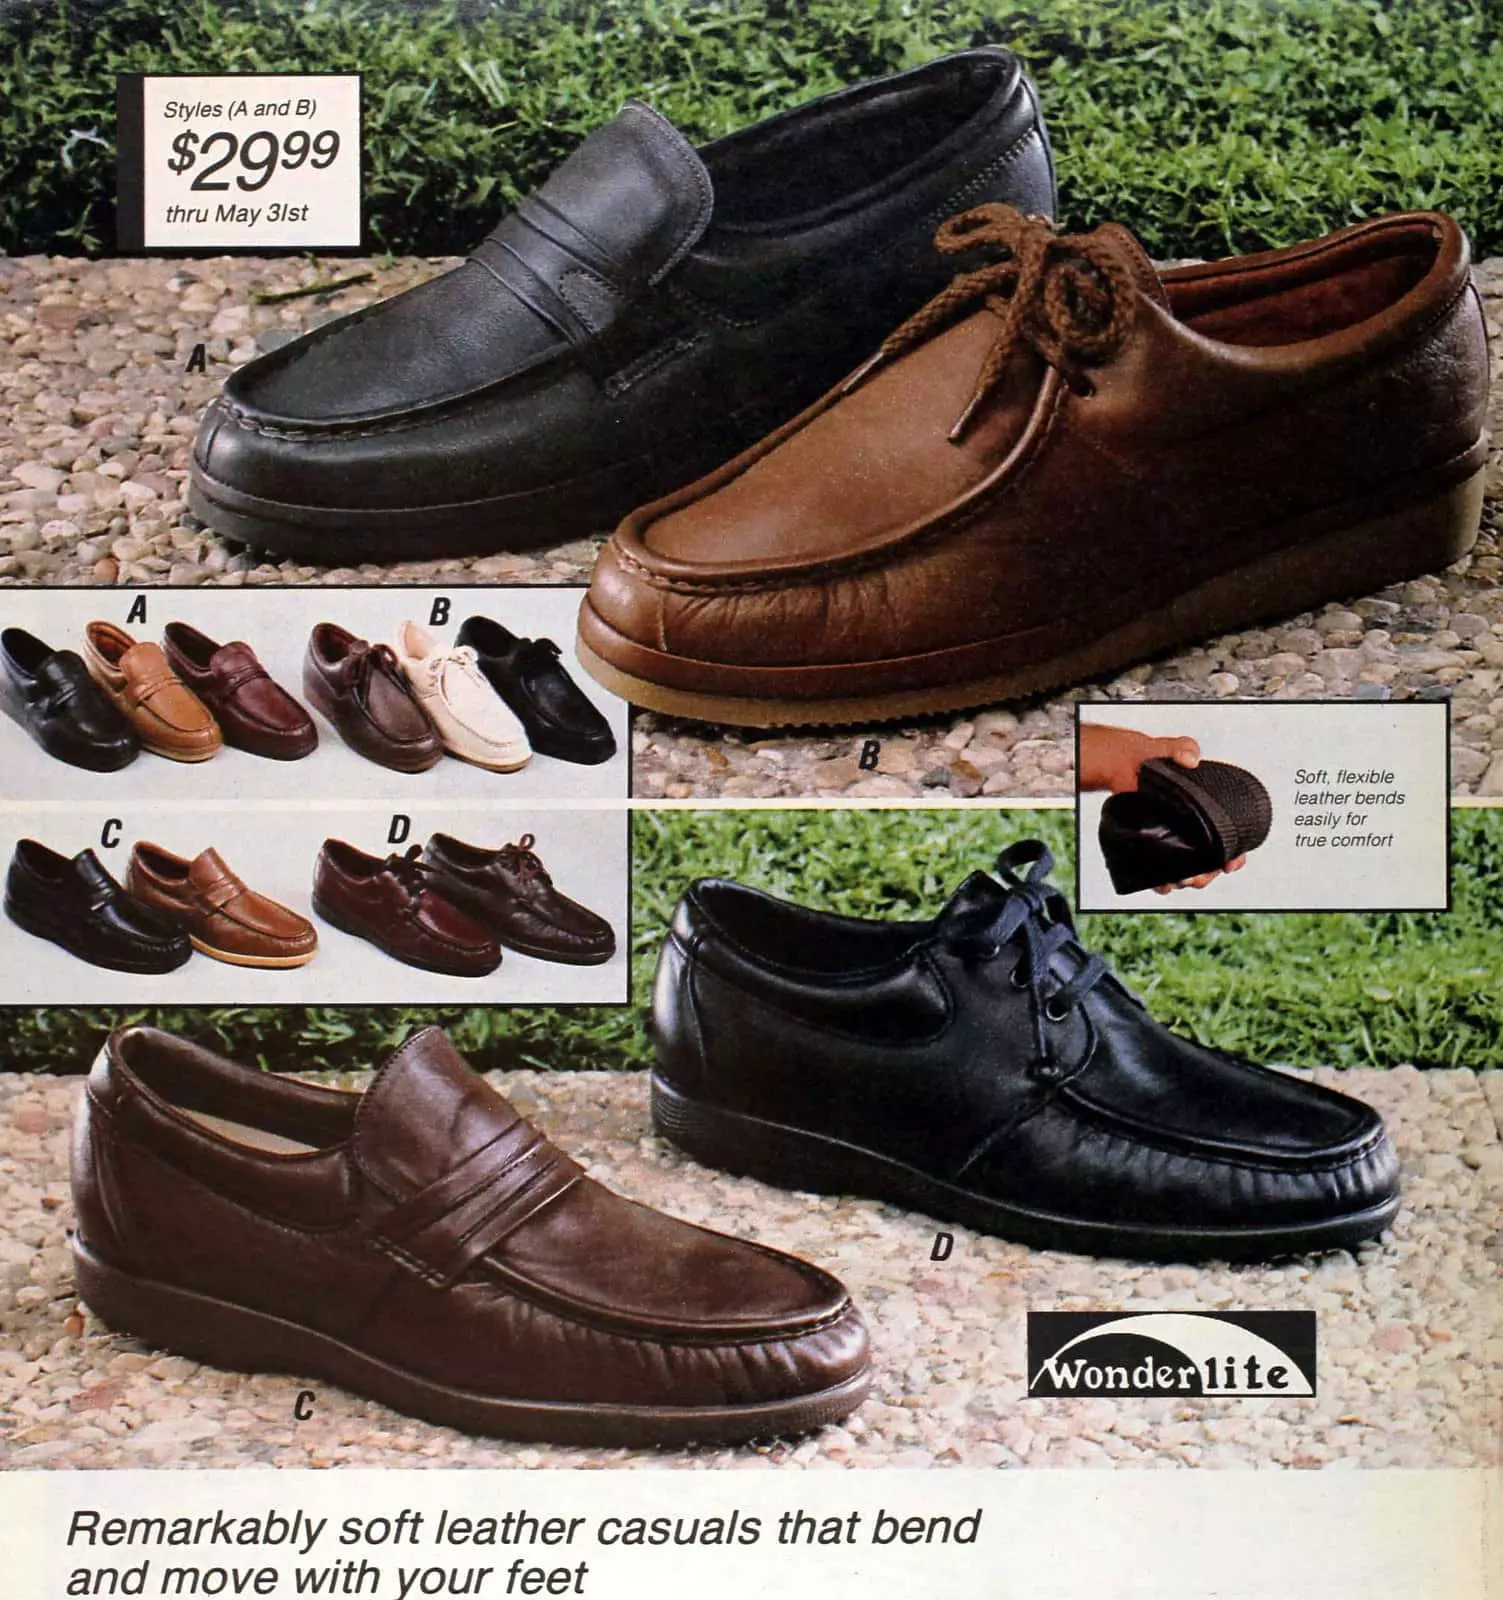 Vintage 80s shoes for men from 1985 (9)